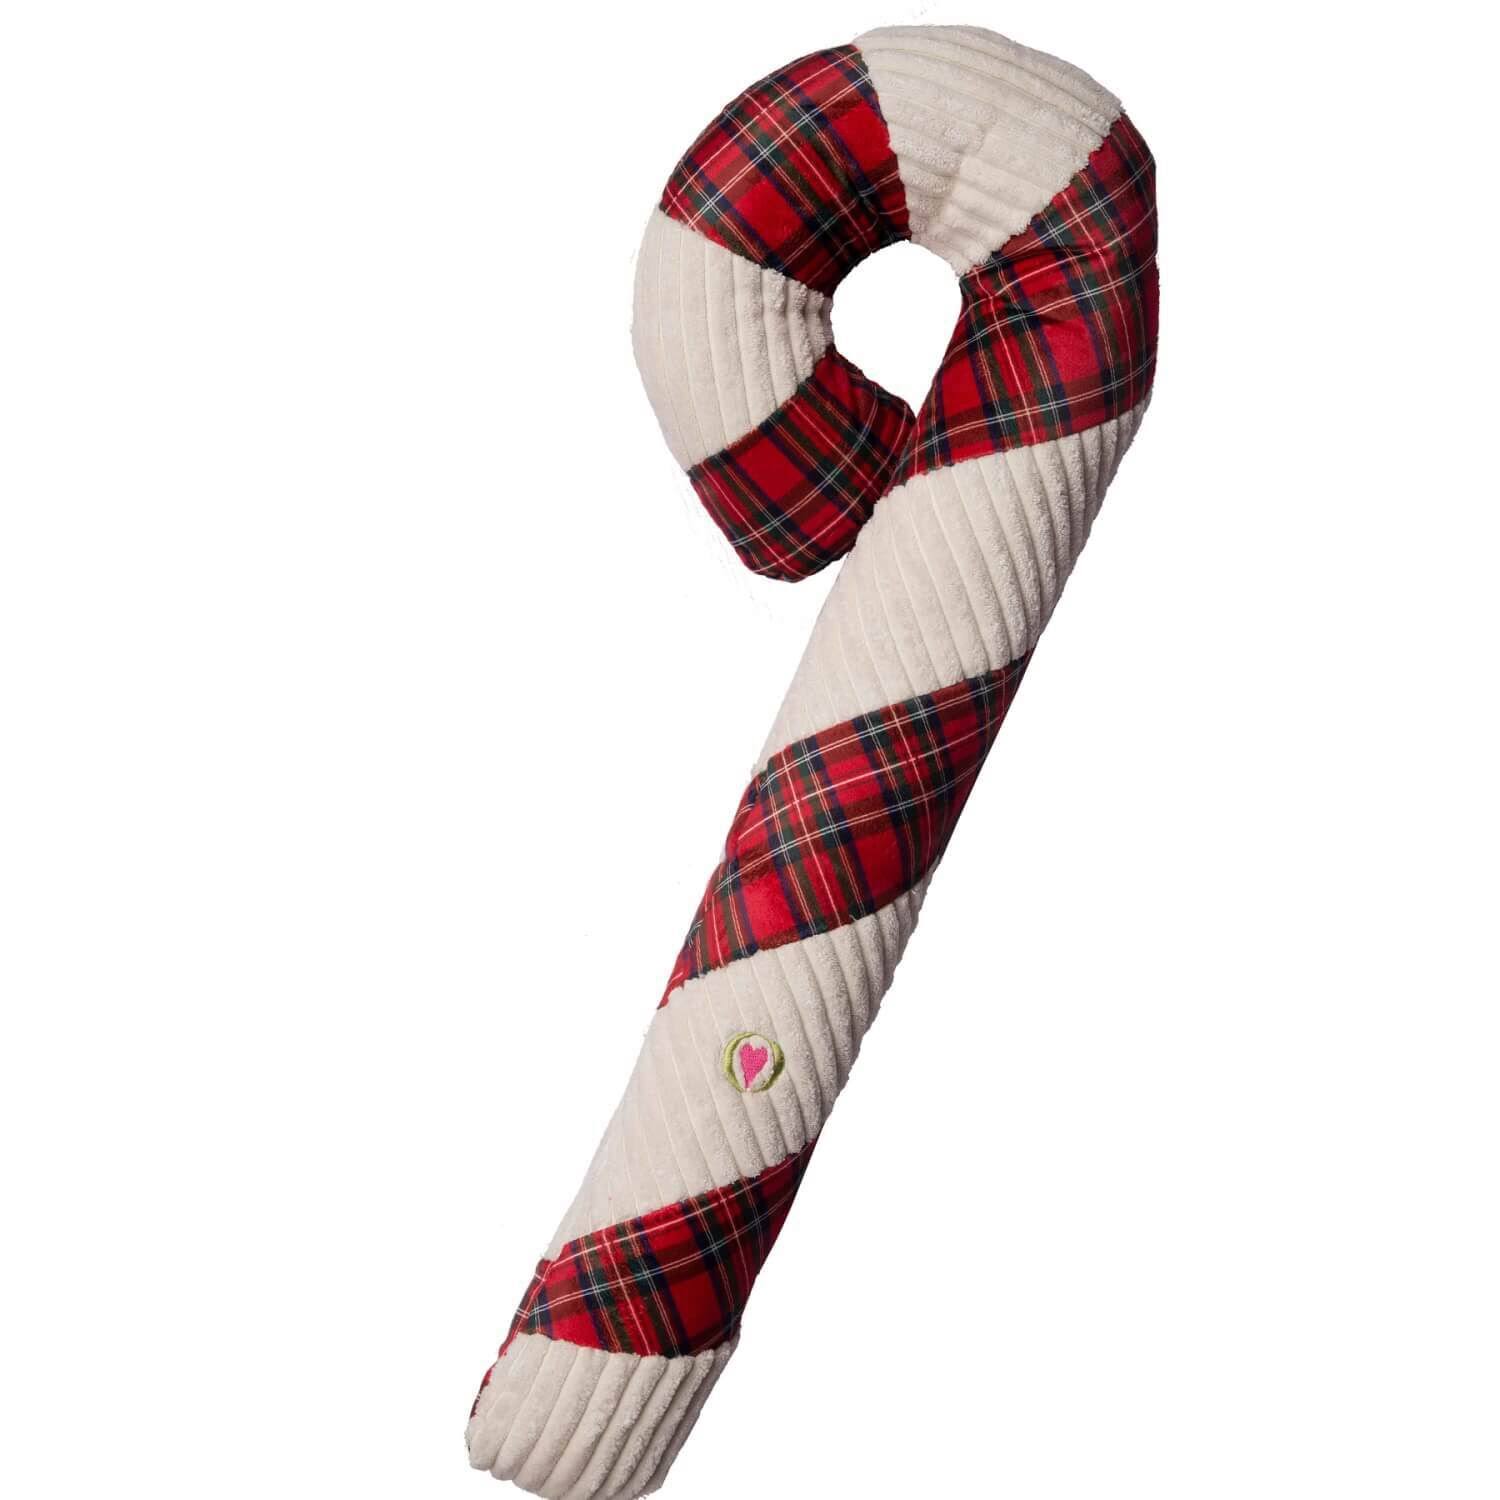 HuggleHounds Holiday Totally Tartan Dog Toy - Candy Cane - Super Size - 2 Feet Long